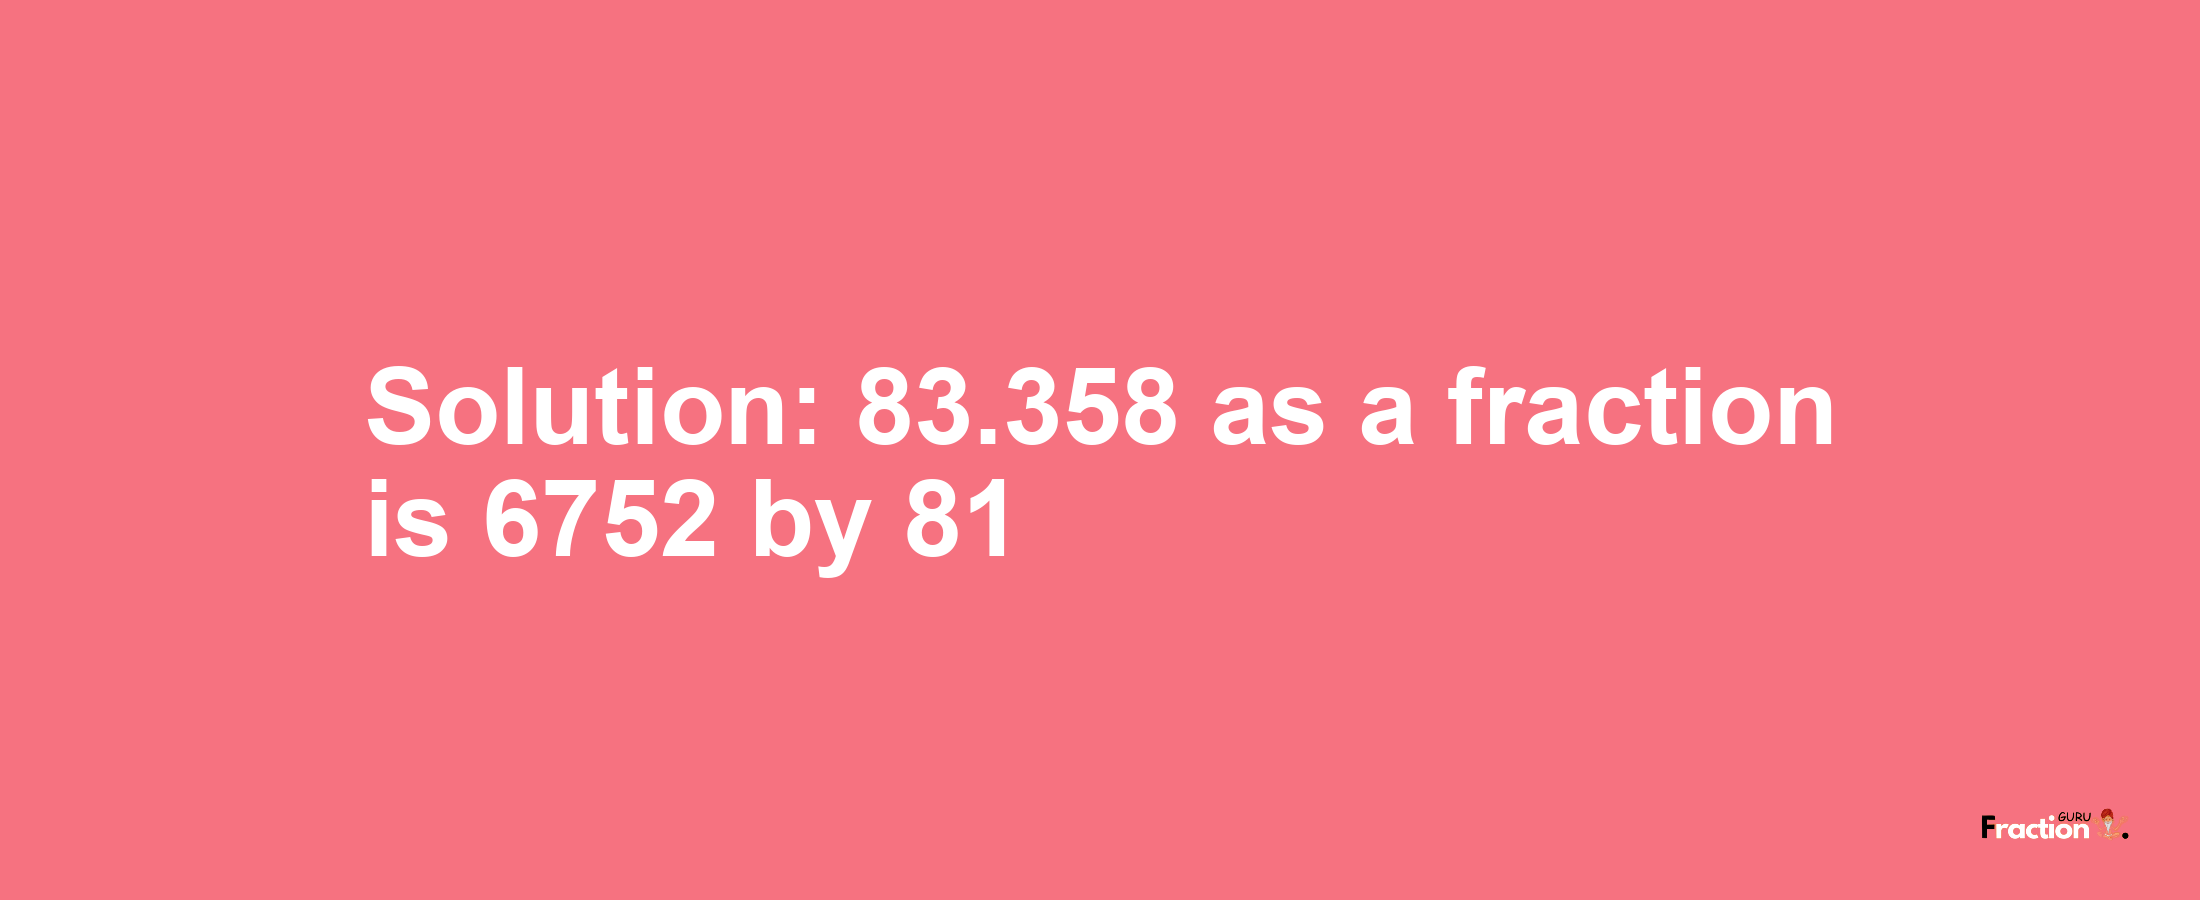 Solution:83.358 as a fraction is 6752/81